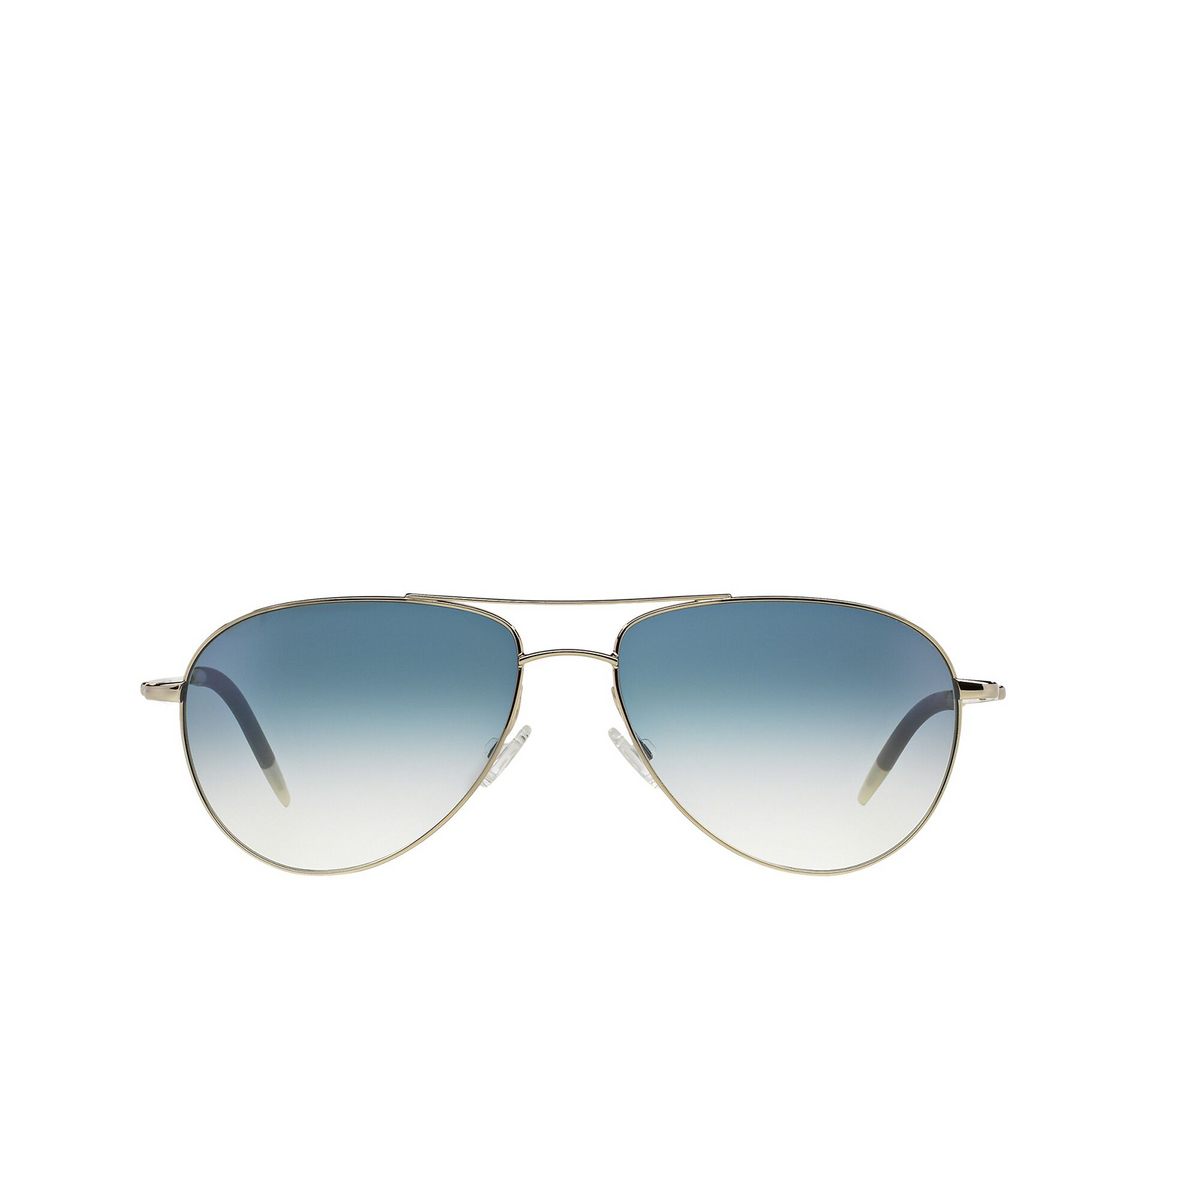 Oliver Peoples® Aviator Sunglasses: Benedict OV1002S color Silver 52413F - front view.